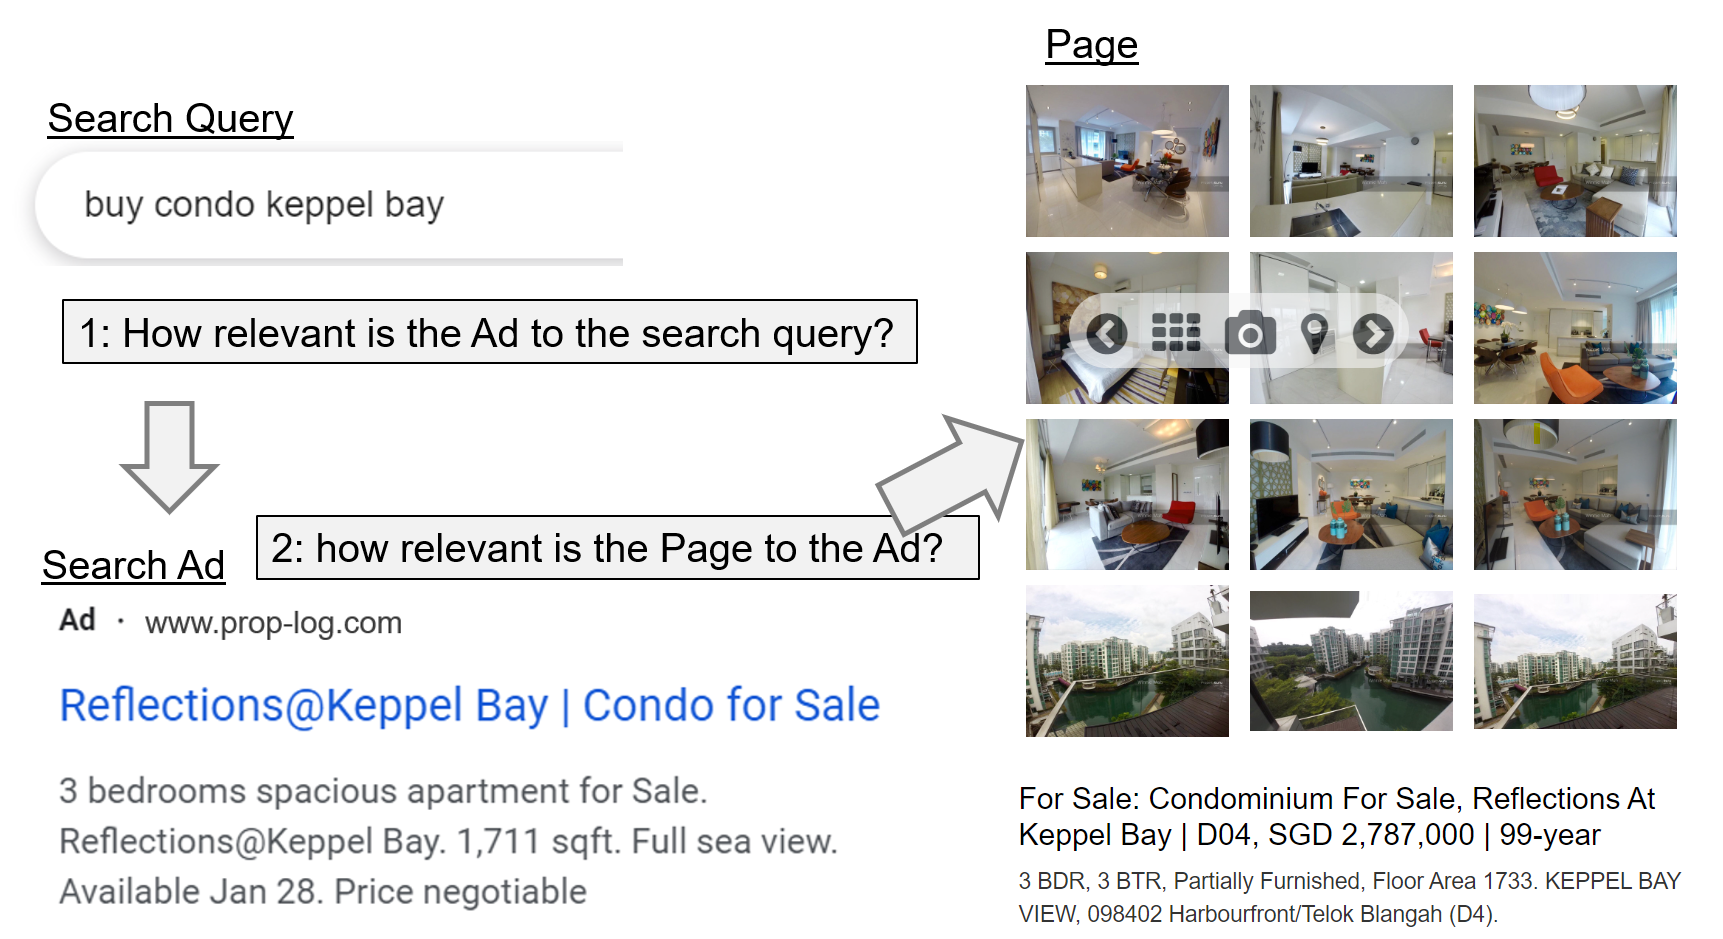 Google Ads - Relevancy and landing page quality